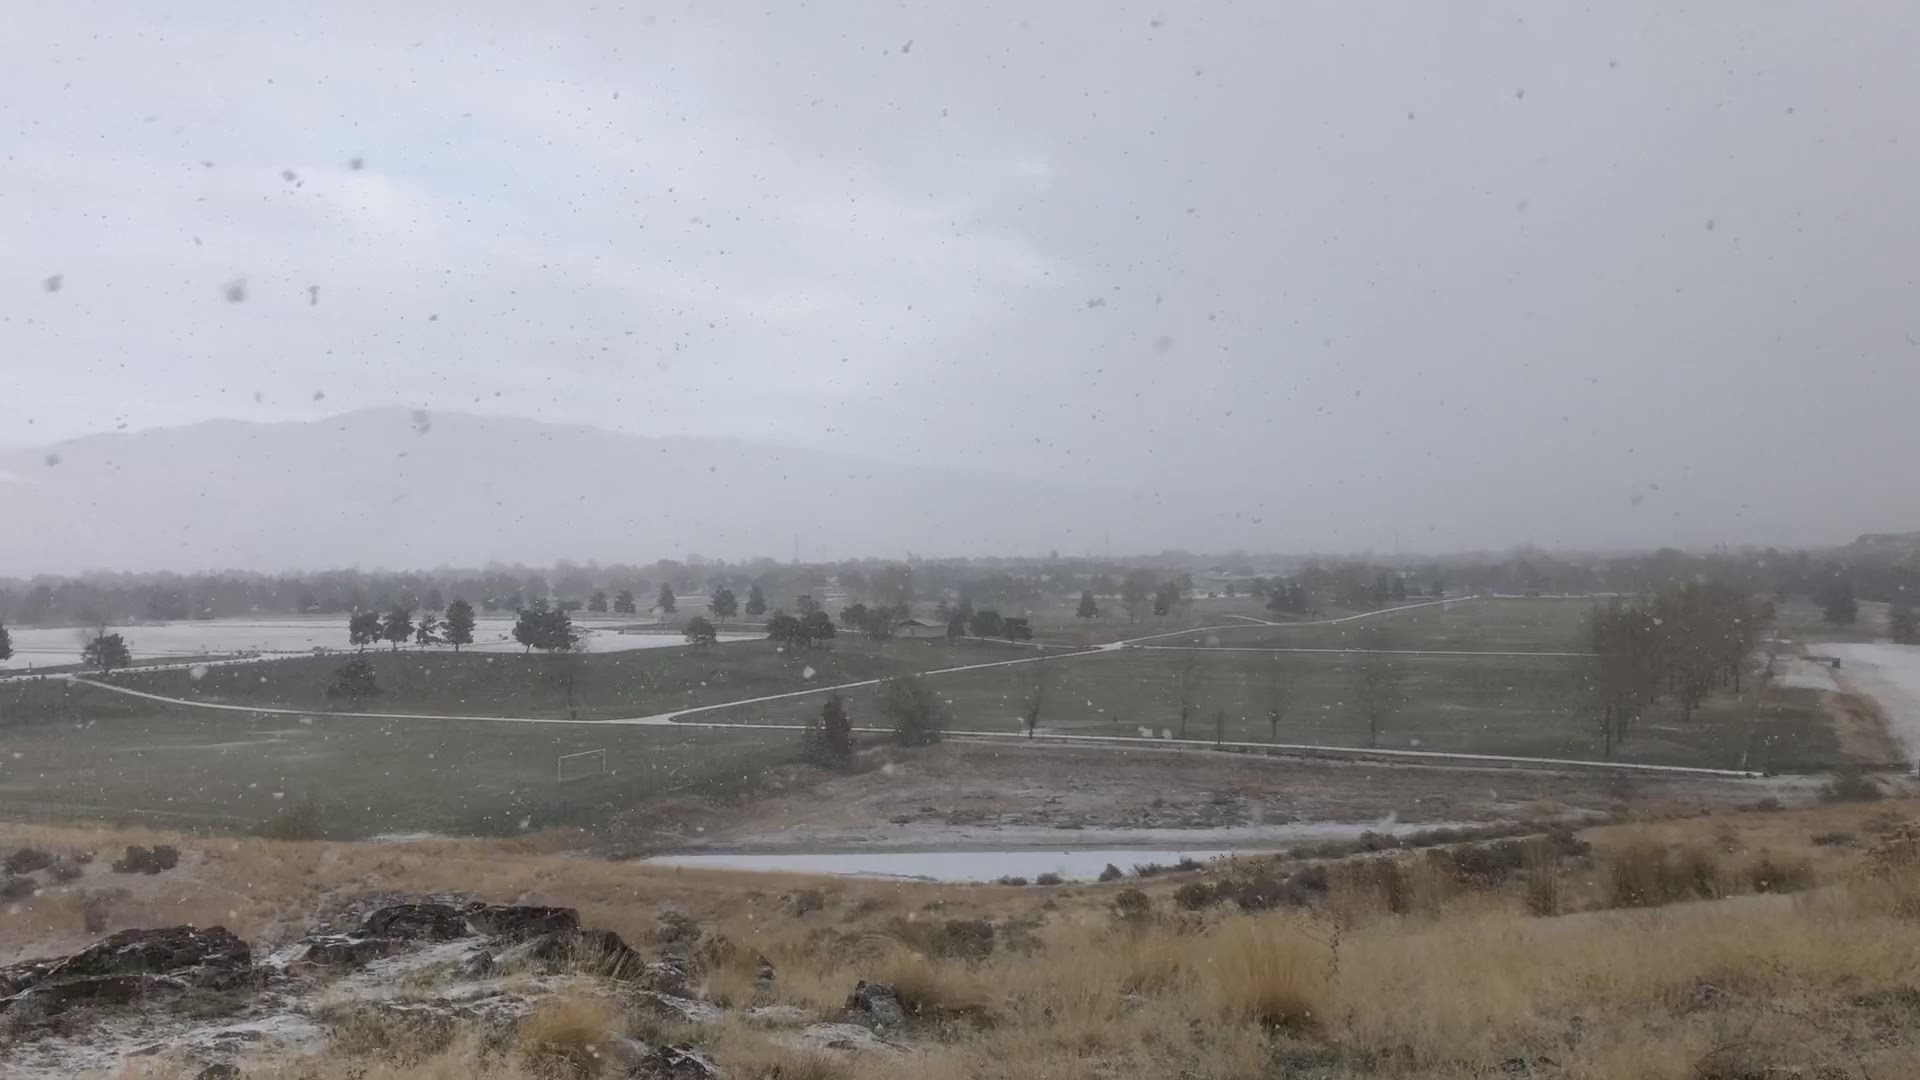 Snow was falling in southeast Boise on Tuesday morning amid the coldest temperatures (so far) of the season.